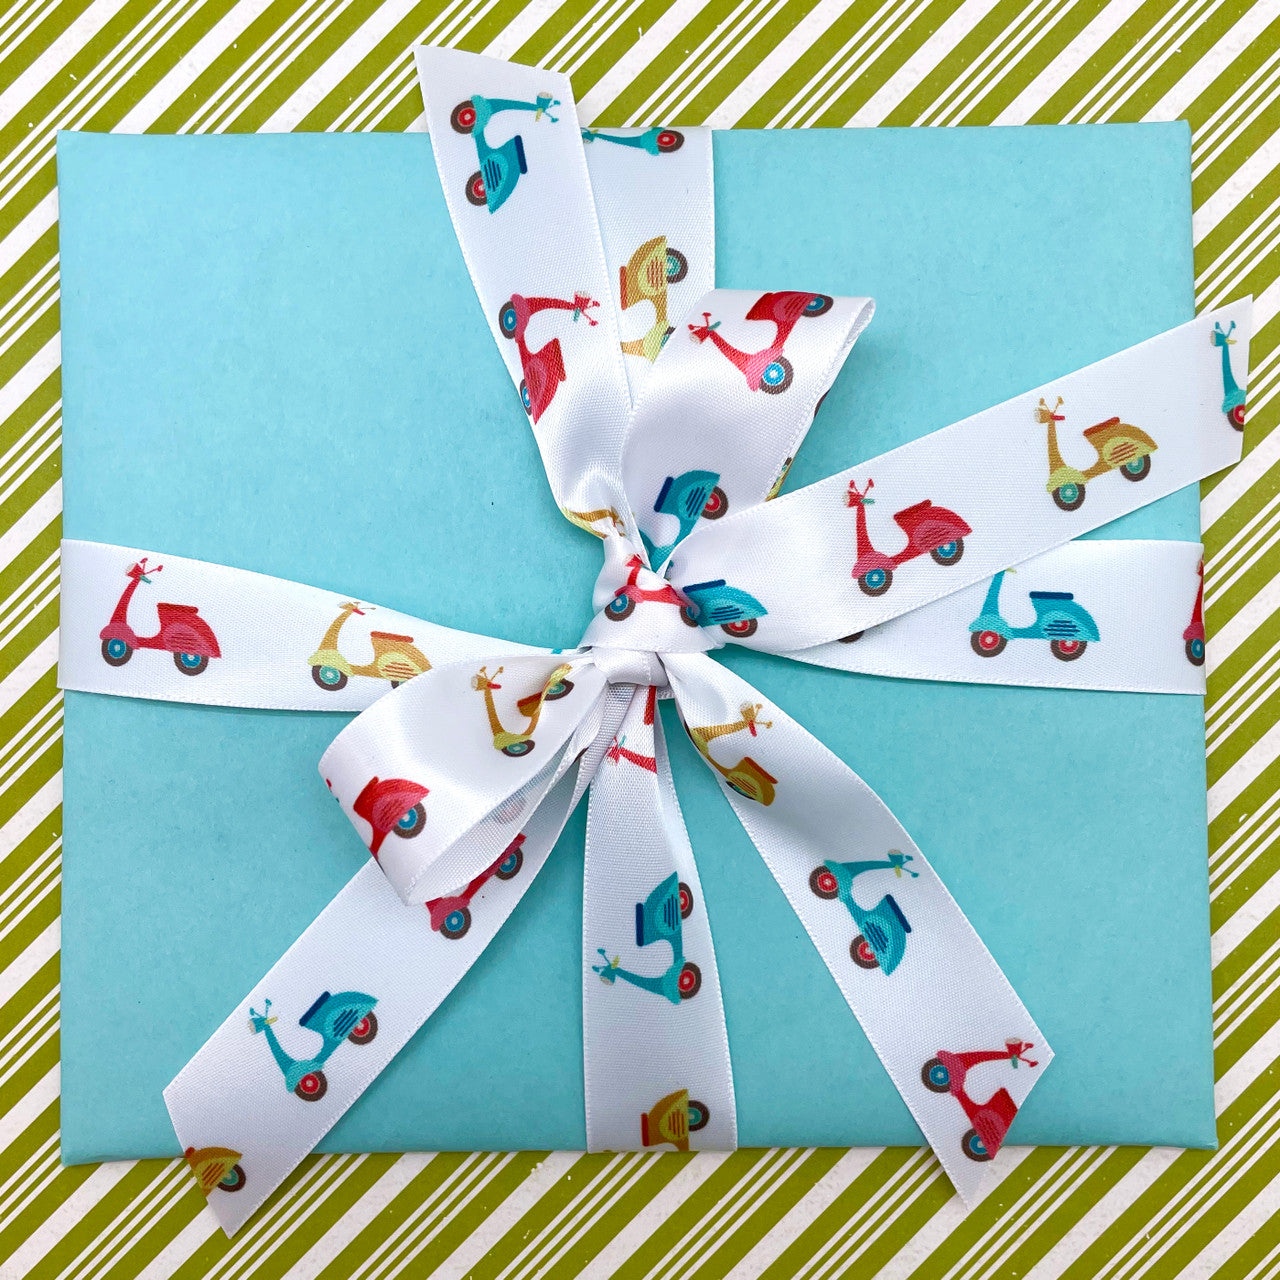 Tie a pretty bow to make the cutest package for a Summer soiree!